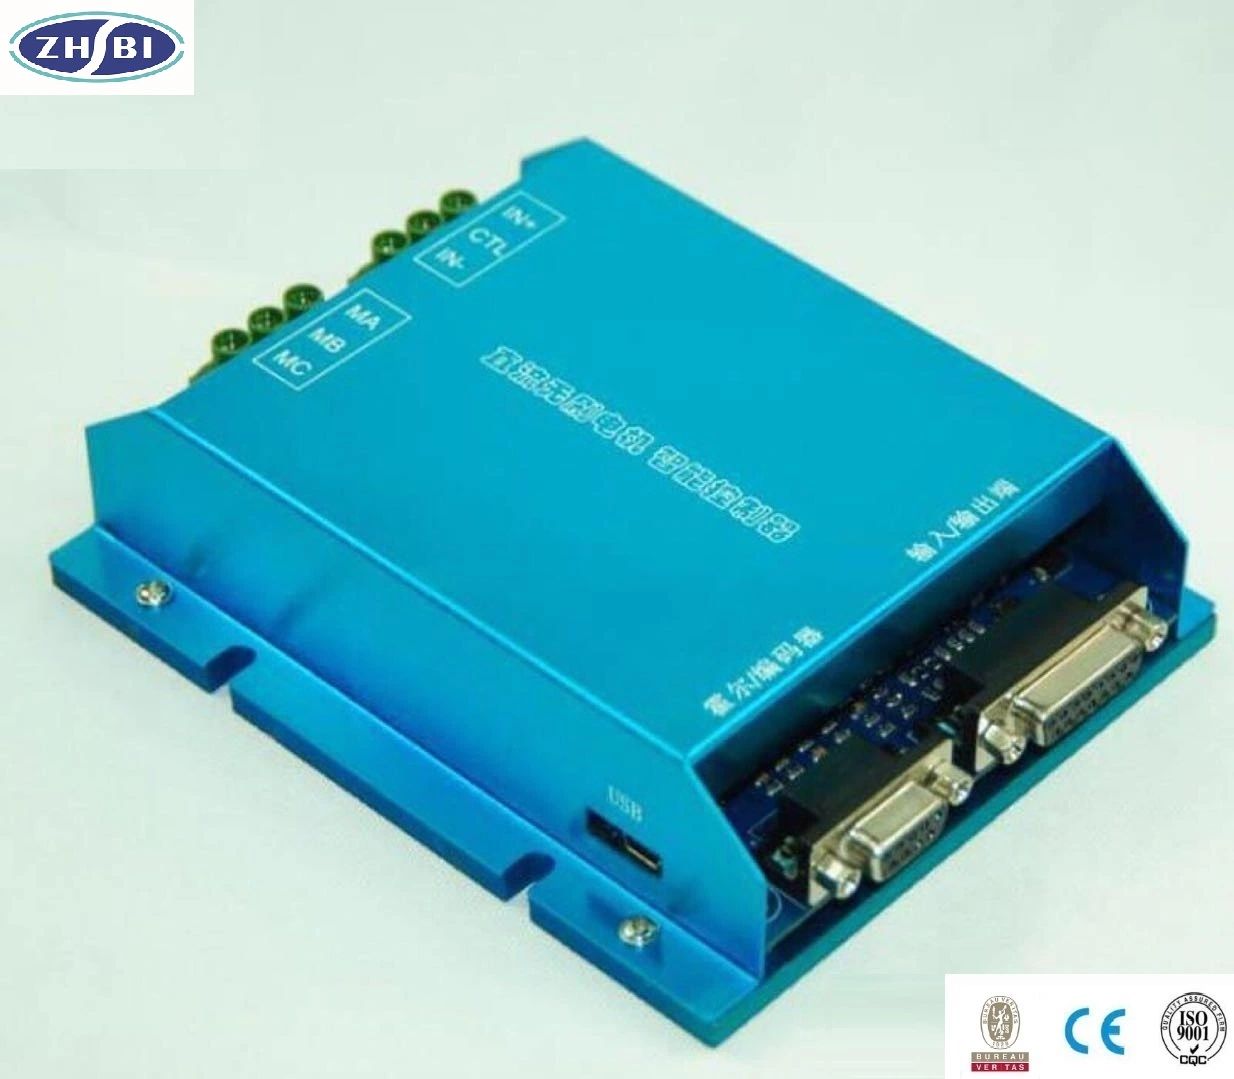 Factory Sales 500W 800W 1000W 50A 24V Brushless DC Motor Driver 48V BLDC Motor Controller Can RS232 Communicate Control